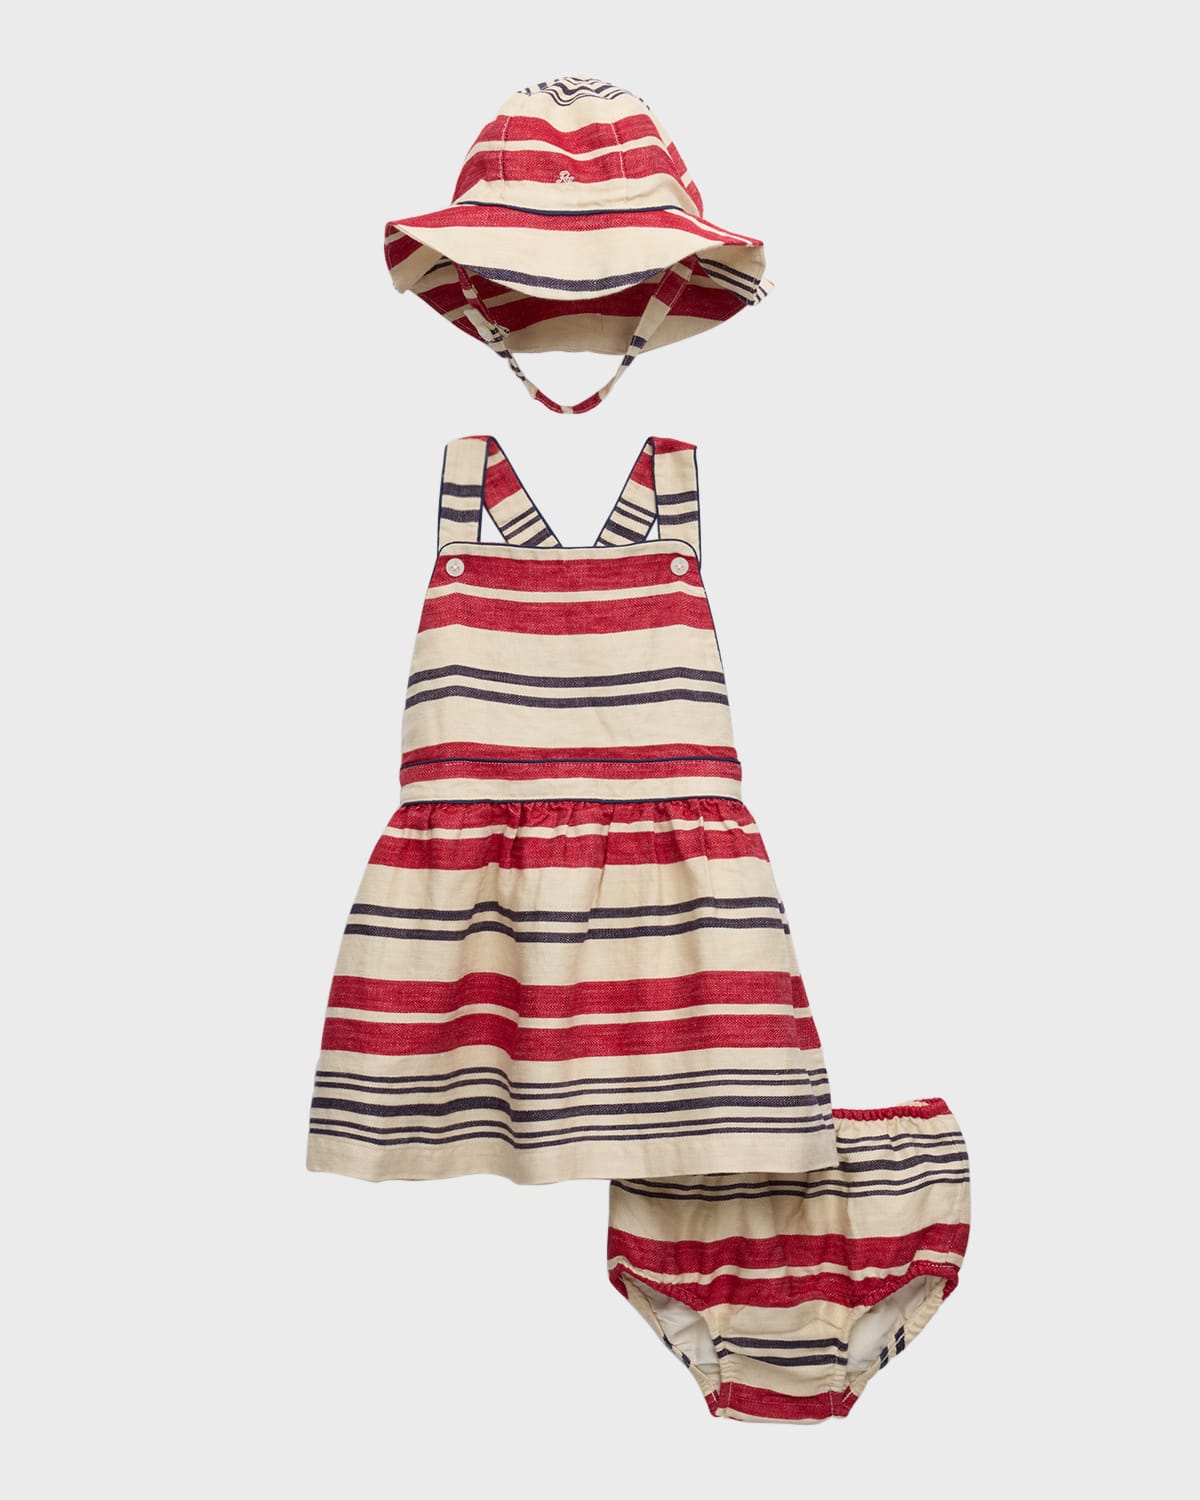 Ralph Lauren Kids' Girl's Striped Linen Dress, Hat And Bloomers Set In Ralph Red Multi